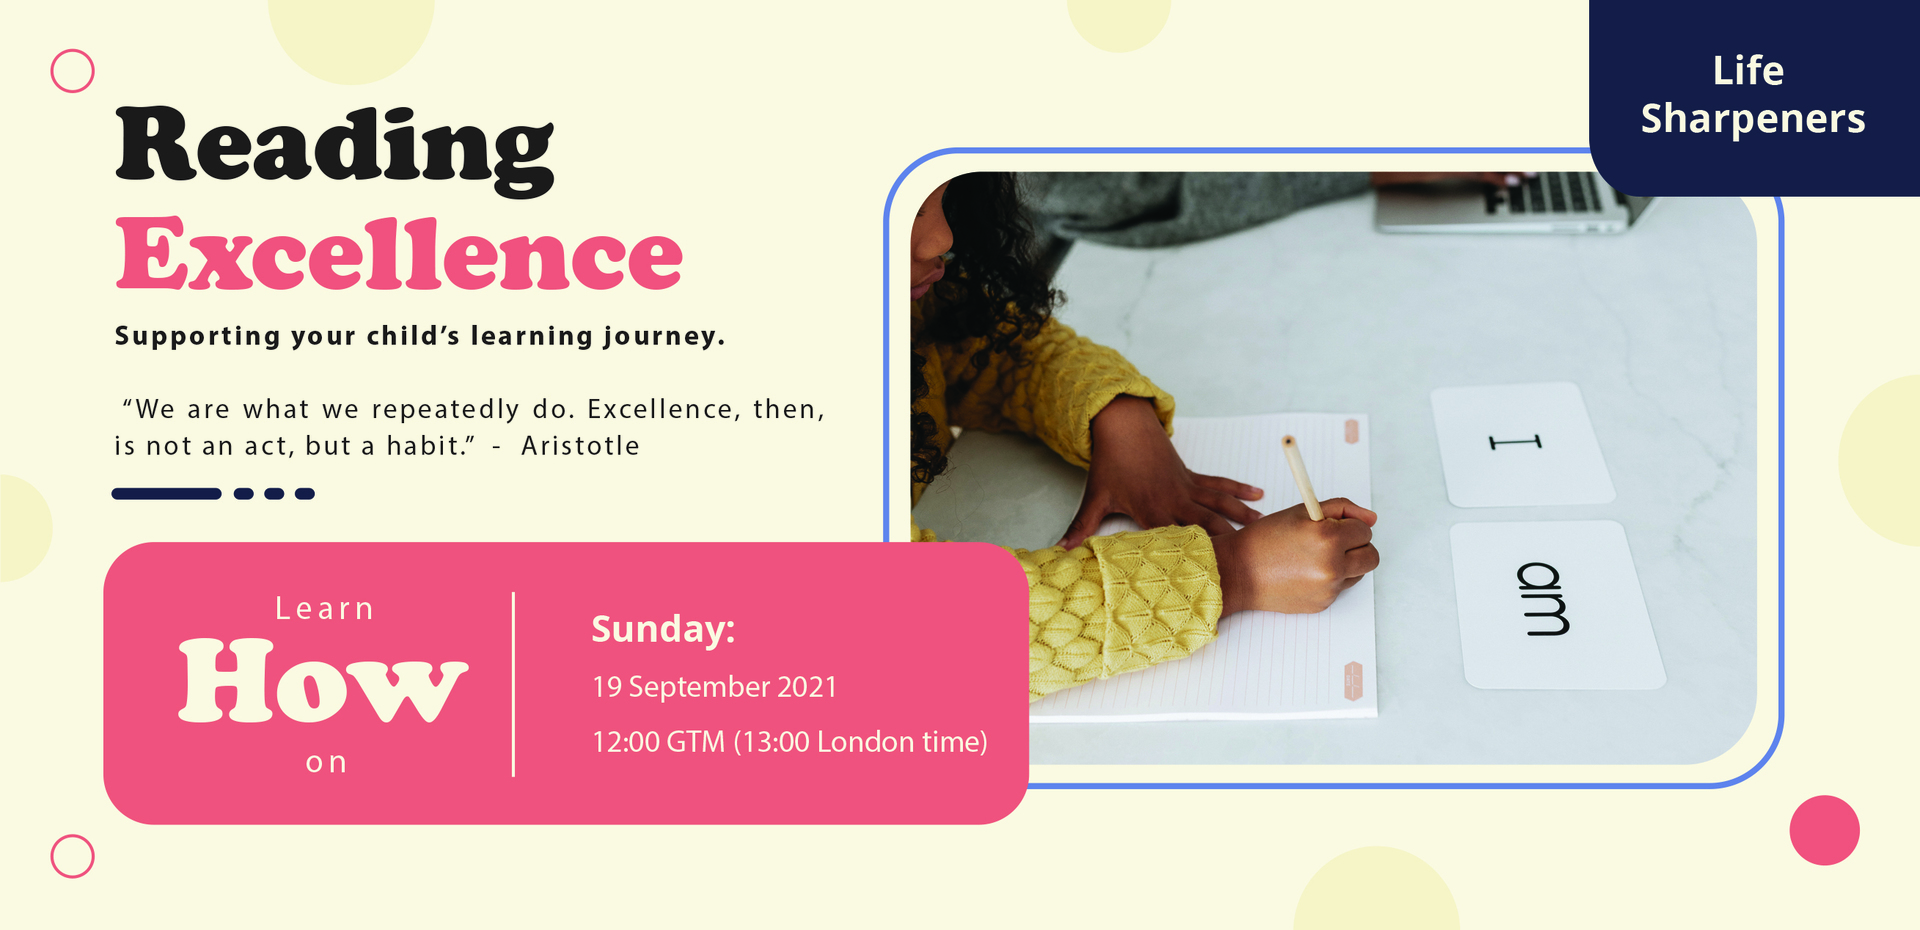 Reading Excellence - Support your child's learning journey, Online Event